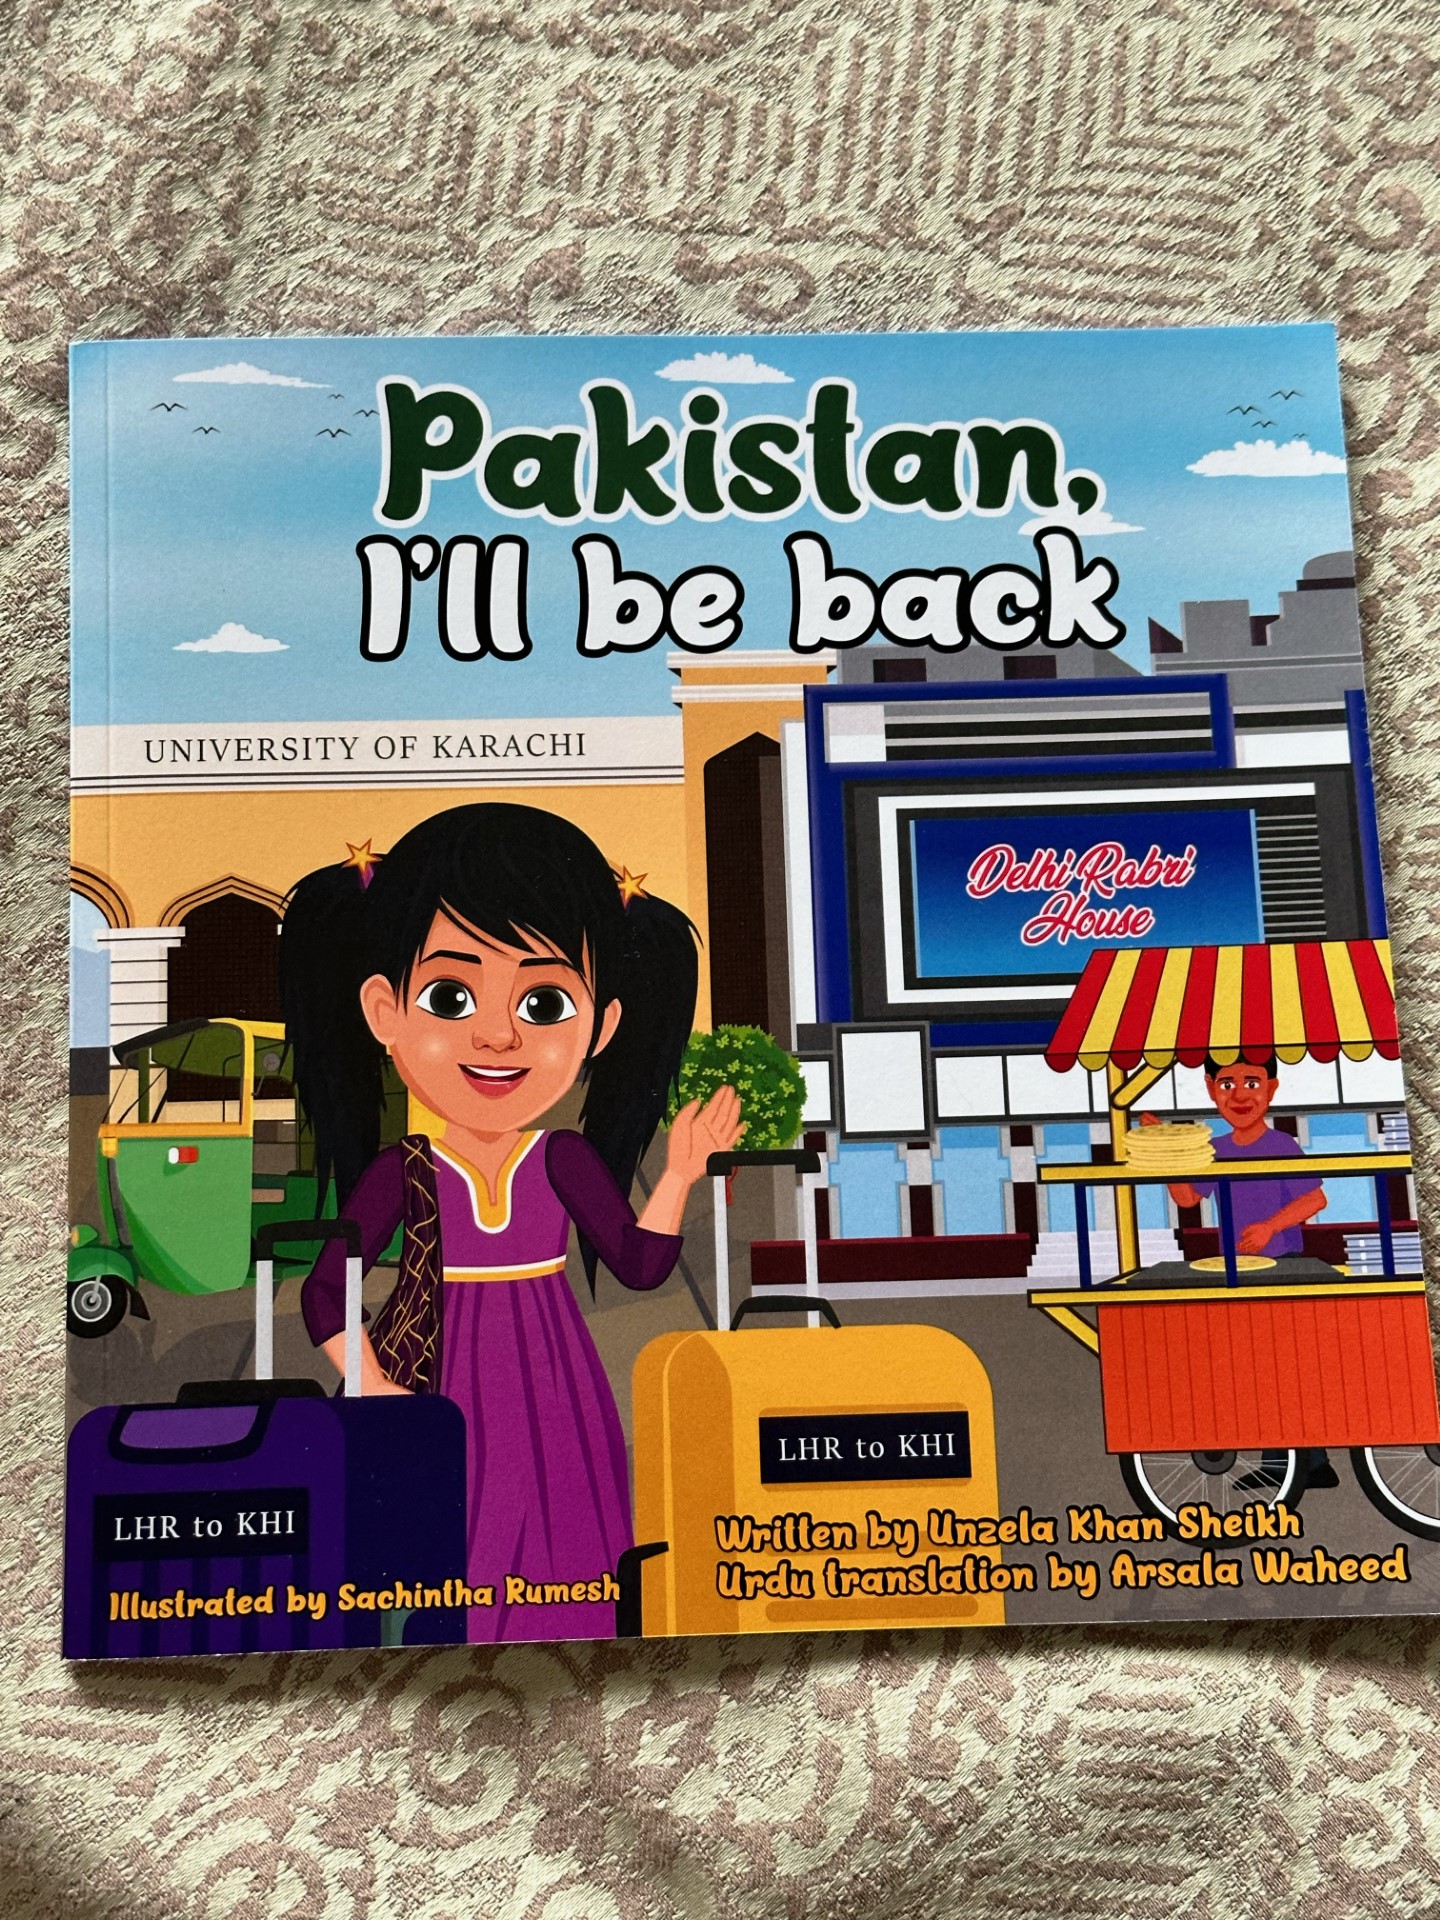 The front cover of the book with a drawing of a young girl in Pakistan